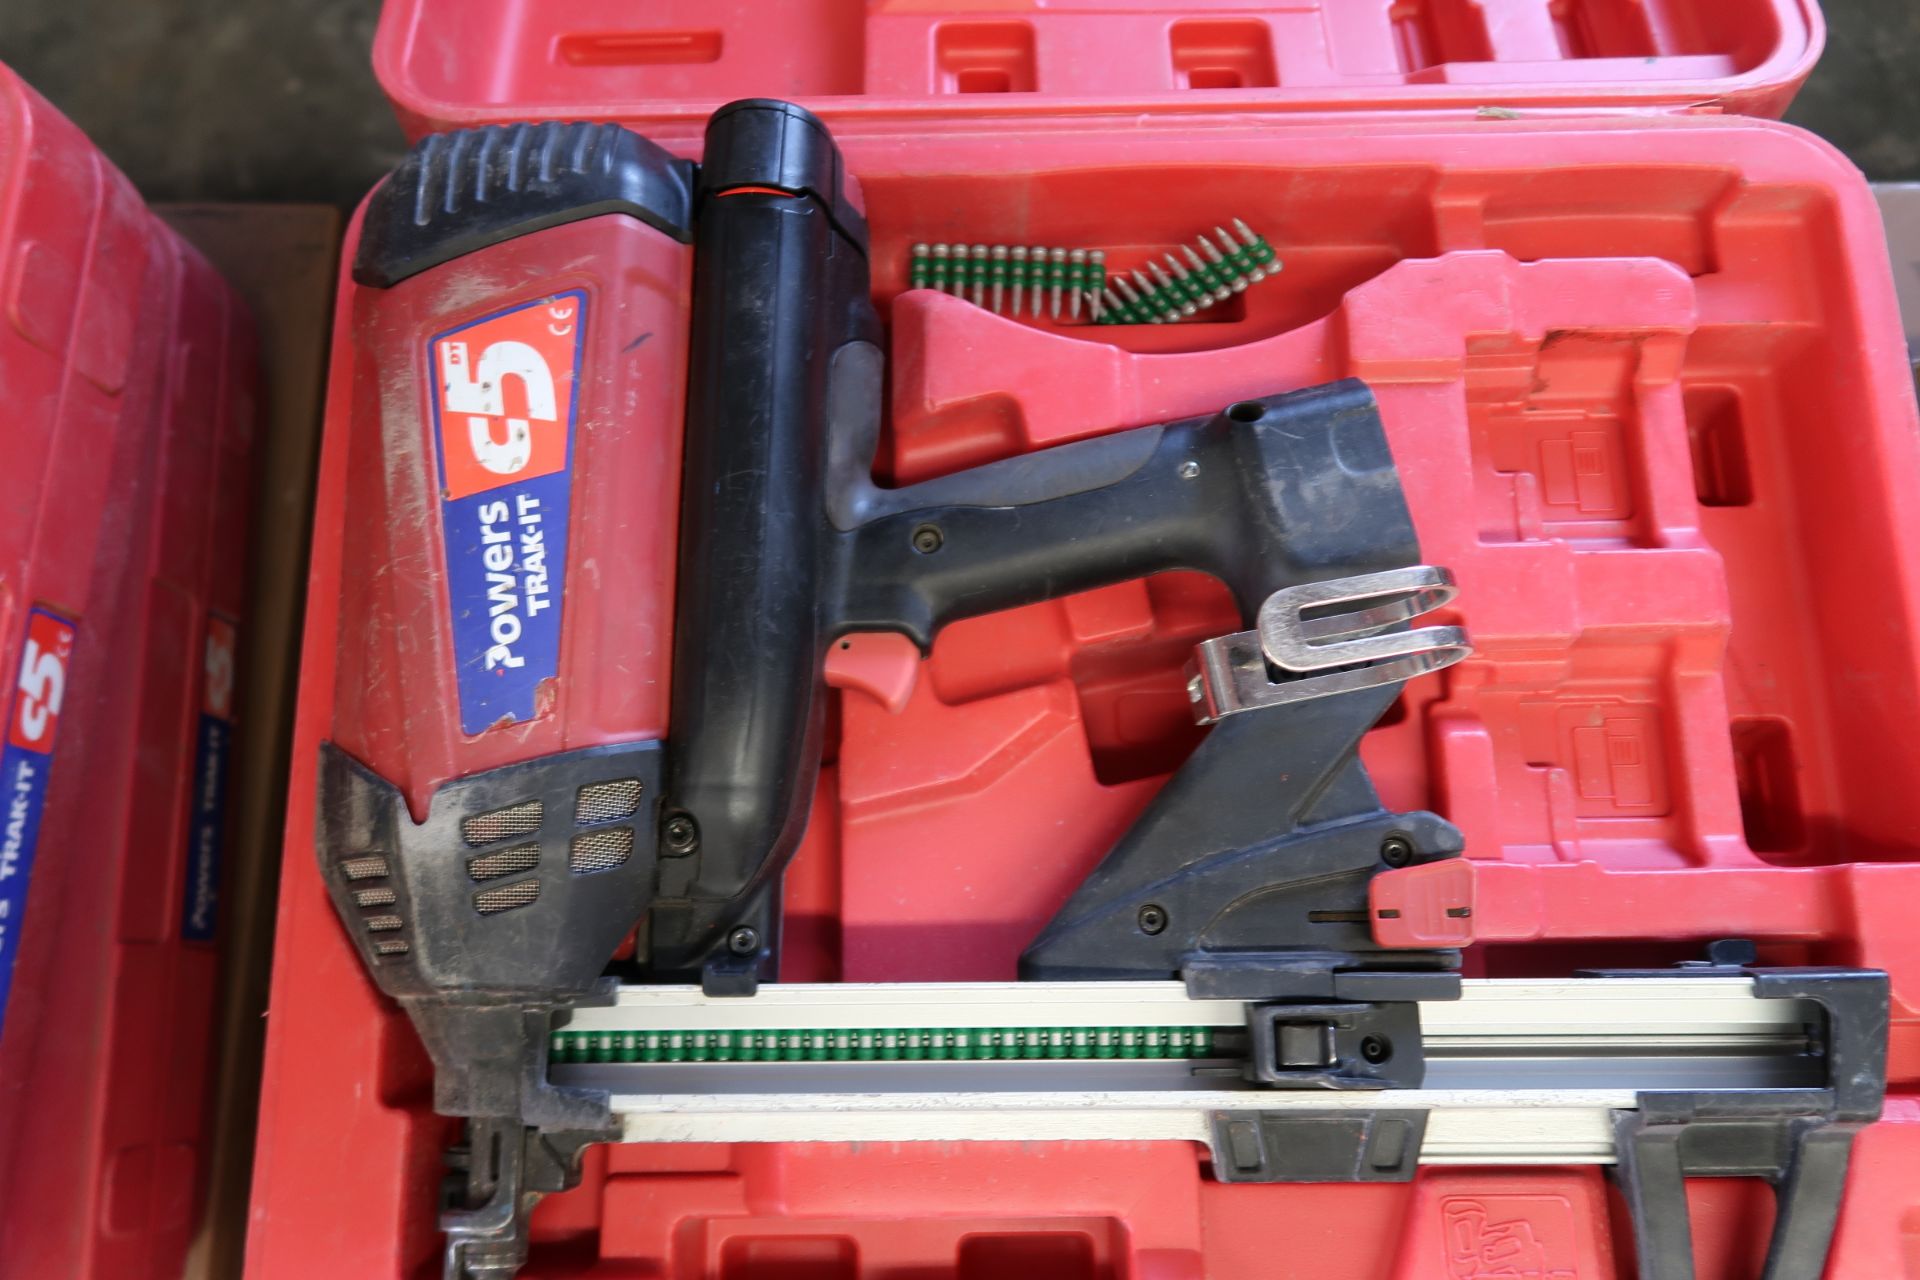 Powers "Trak-It C5" Cordless Nailers (2 - NO BATTERIES OR CHARGERS) (SOLD AS-IS - NO WARRANTY) - Image 3 of 5